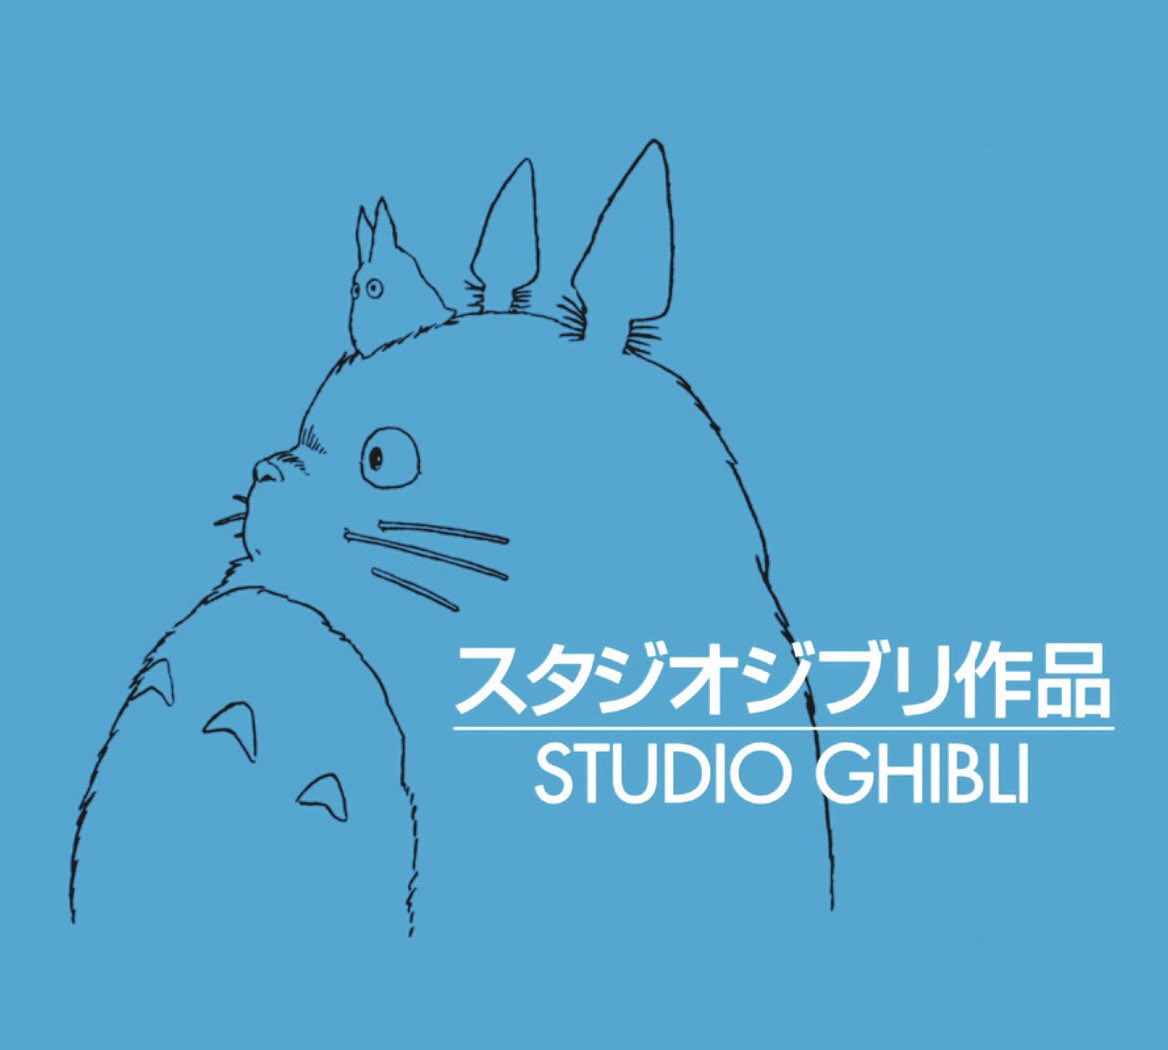 The Studio Ghibli logo, which features white English and Japanese characters, and a blue background with Totoro in profile. 